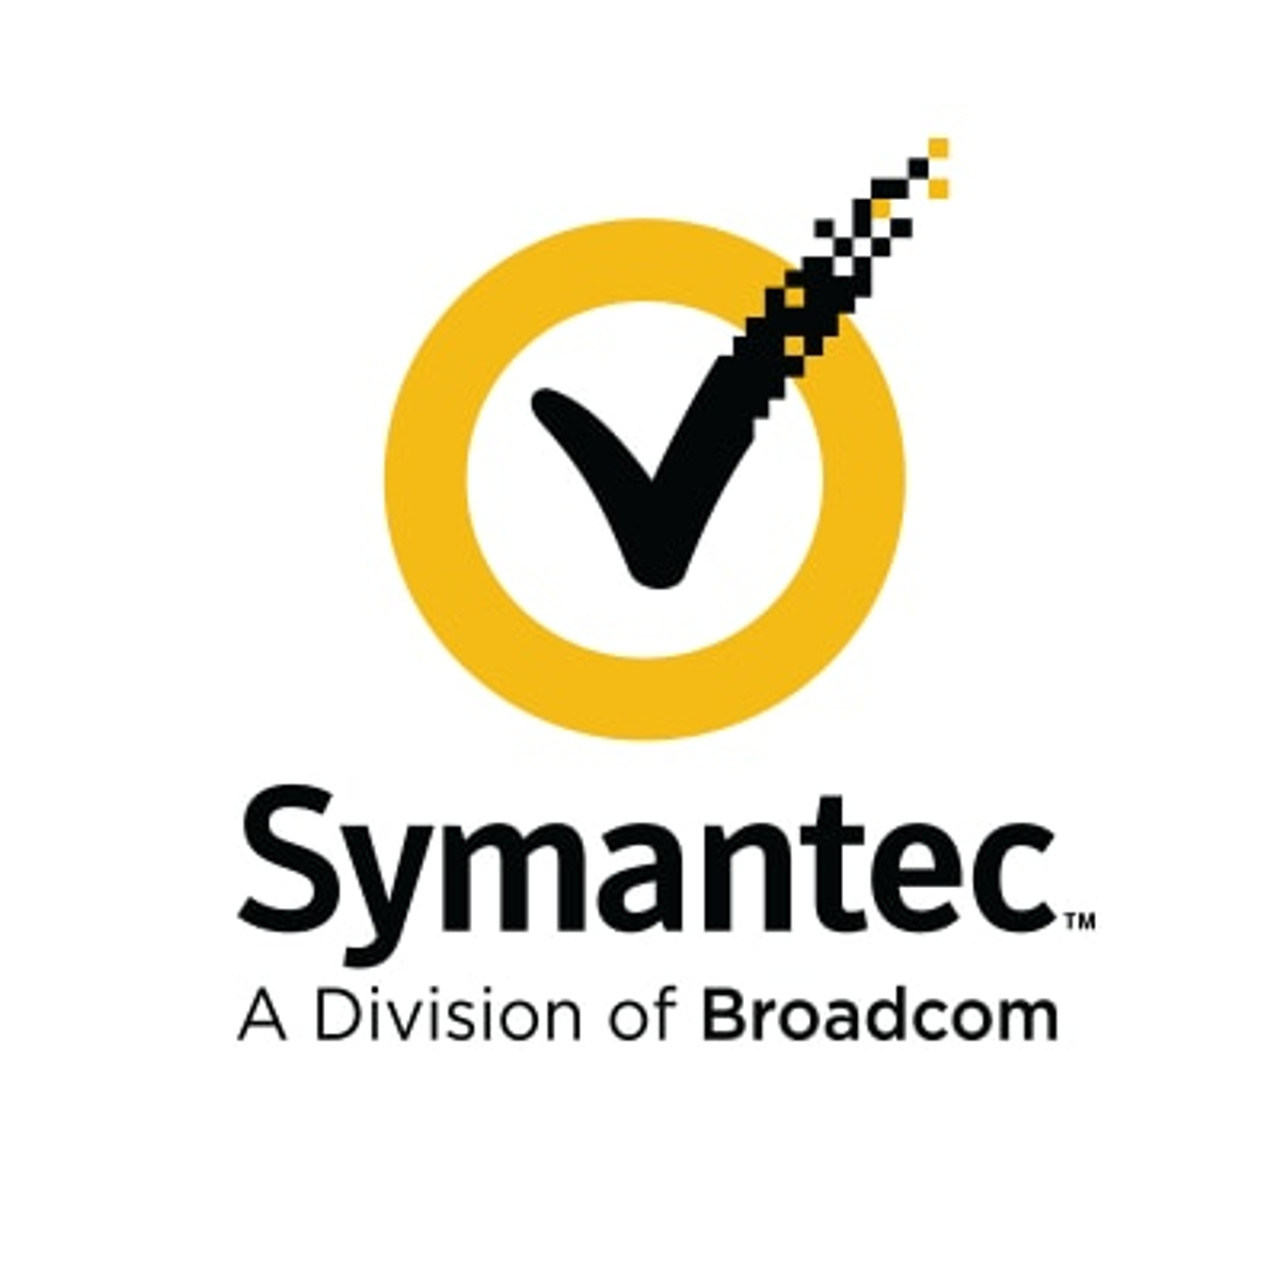 Symantec Complete Endpoint Defense (without SEP), Initial Hybrid Subscription License with Support, 1-24 Devices 1 YR